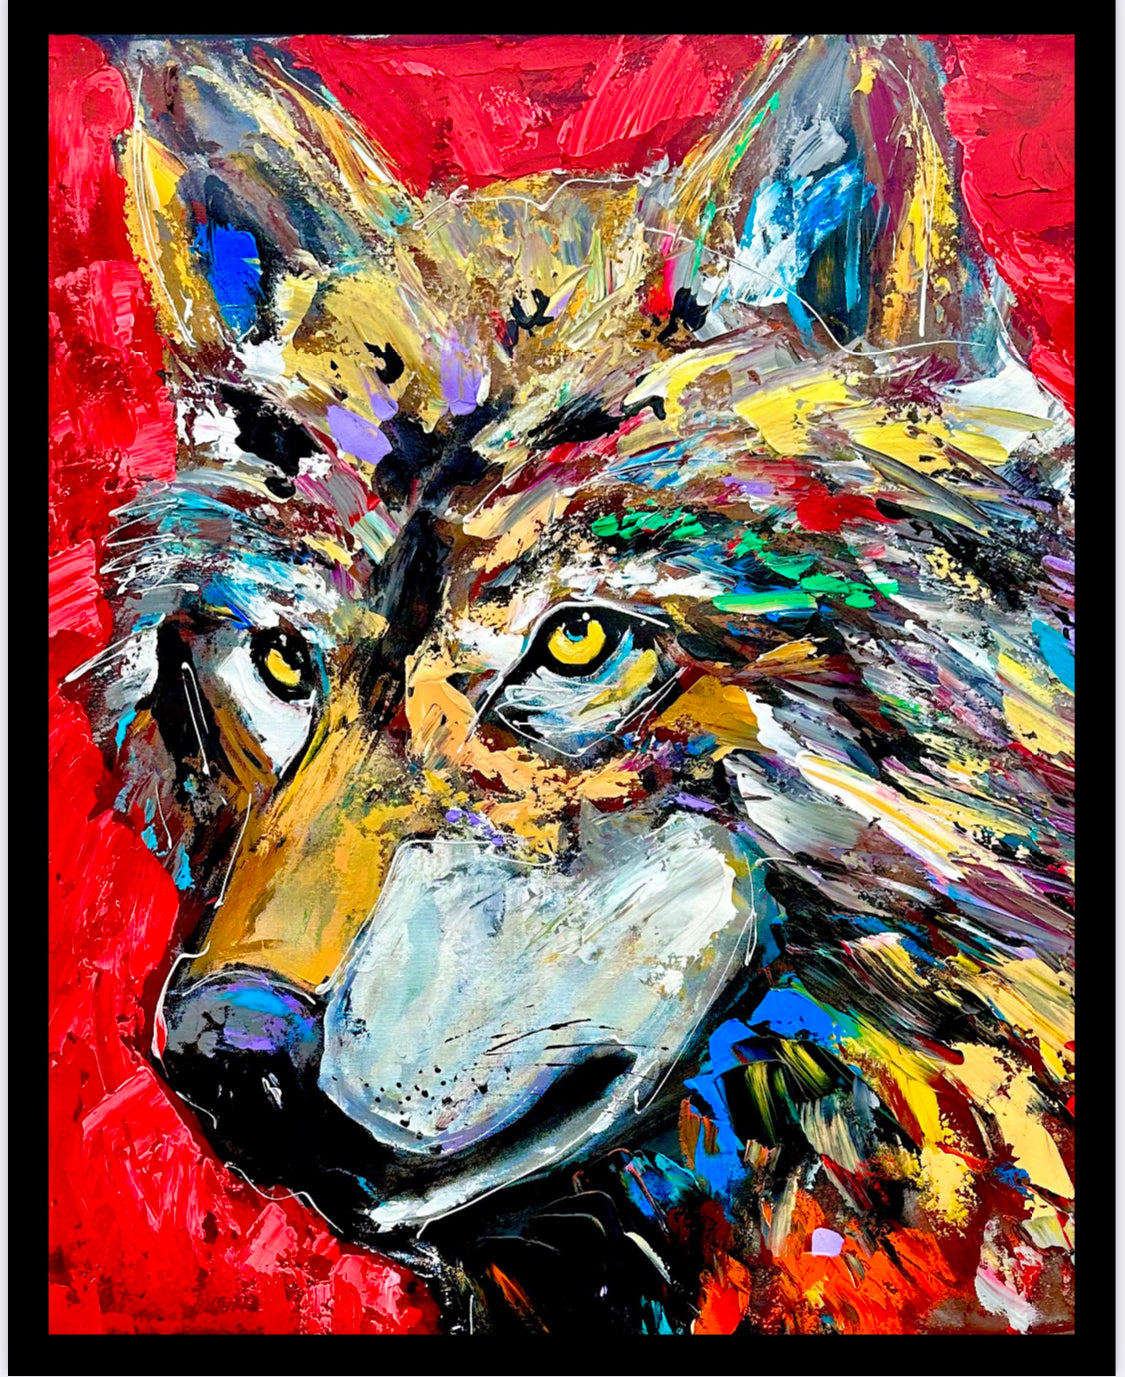 16x20 Vibrant Print: The Strength of the Wolf